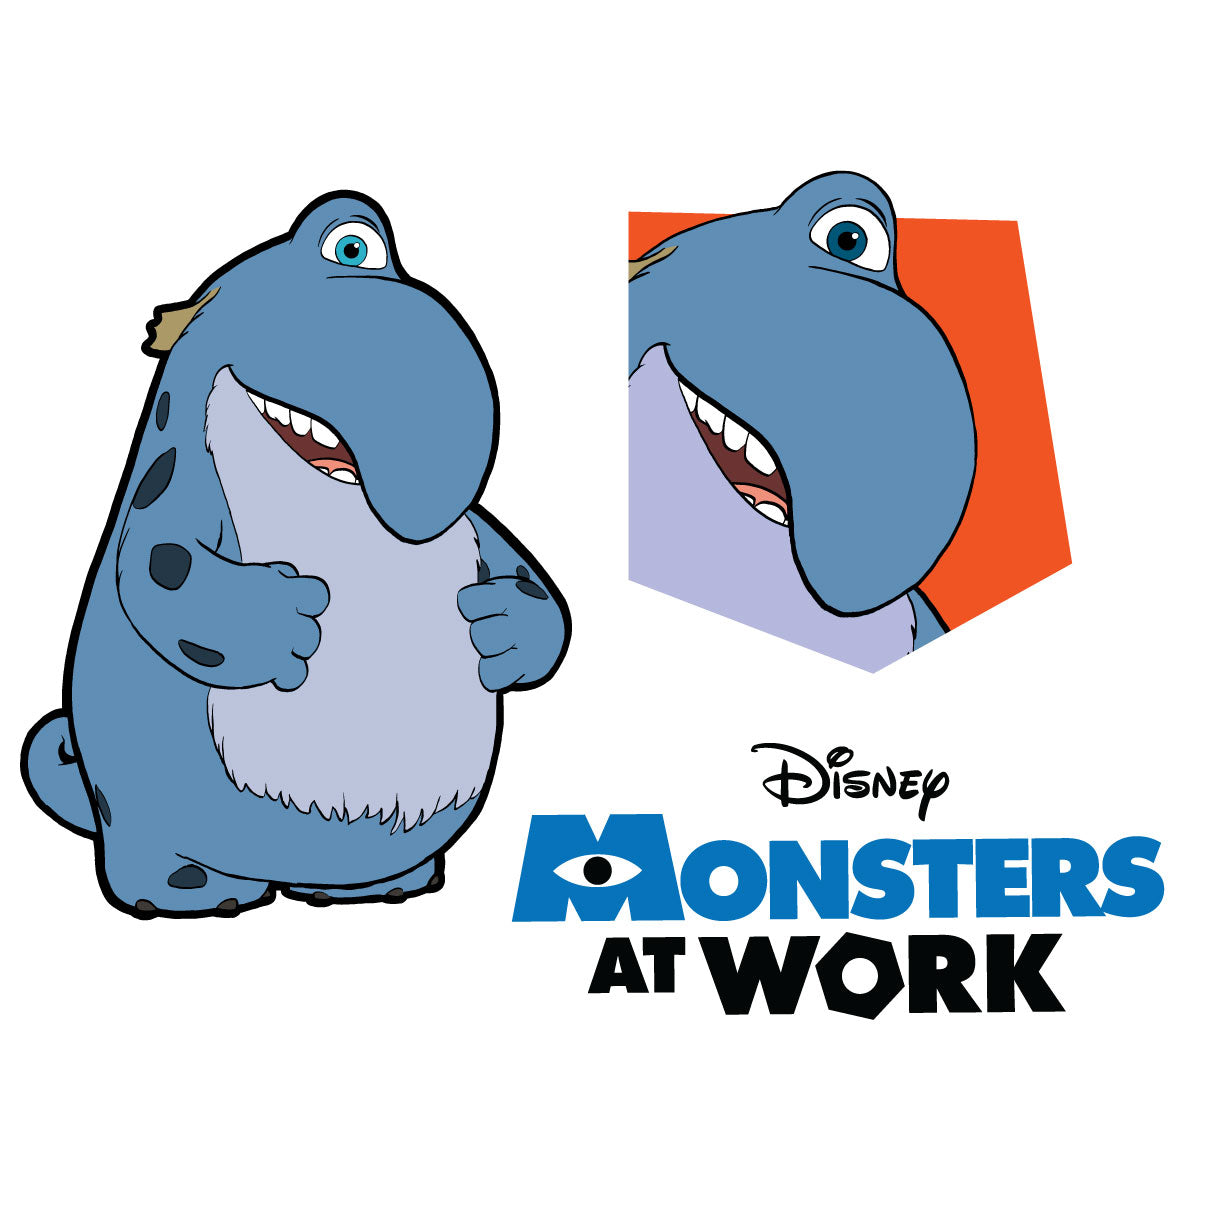 Sheet of 4 -Monsters at Work: Fritz Minis        - Officially Licensed Disney Removable Wall   Adhesive Decal